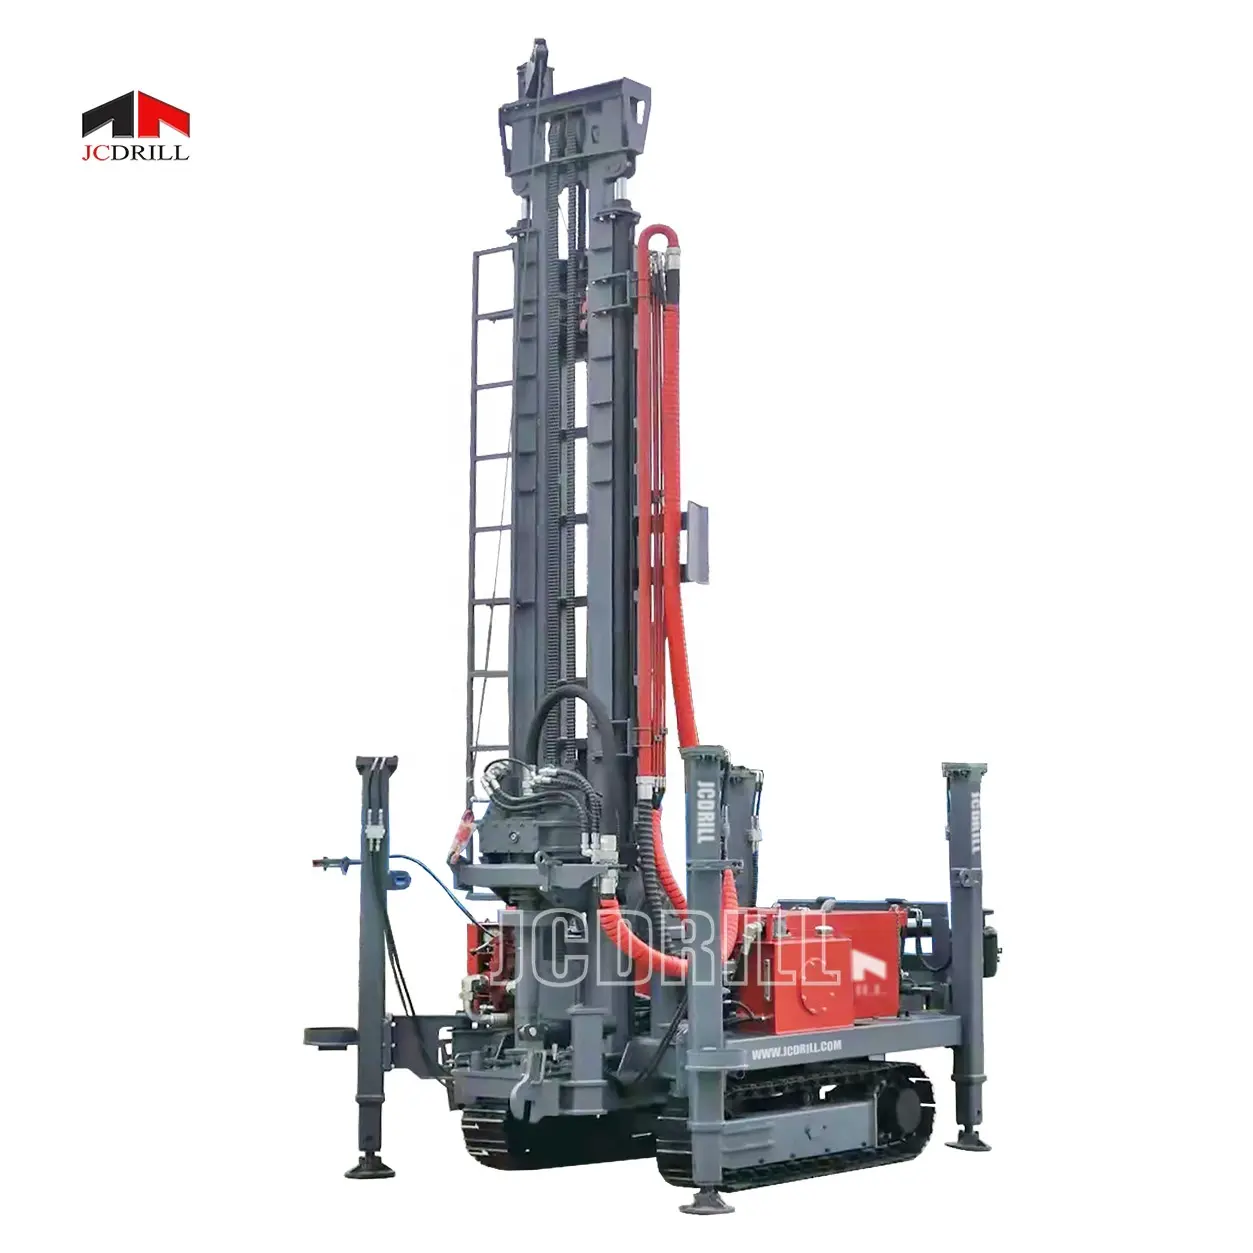 JCDRILL rotating used drill machine 300 meter deep crawler water well drilling rig